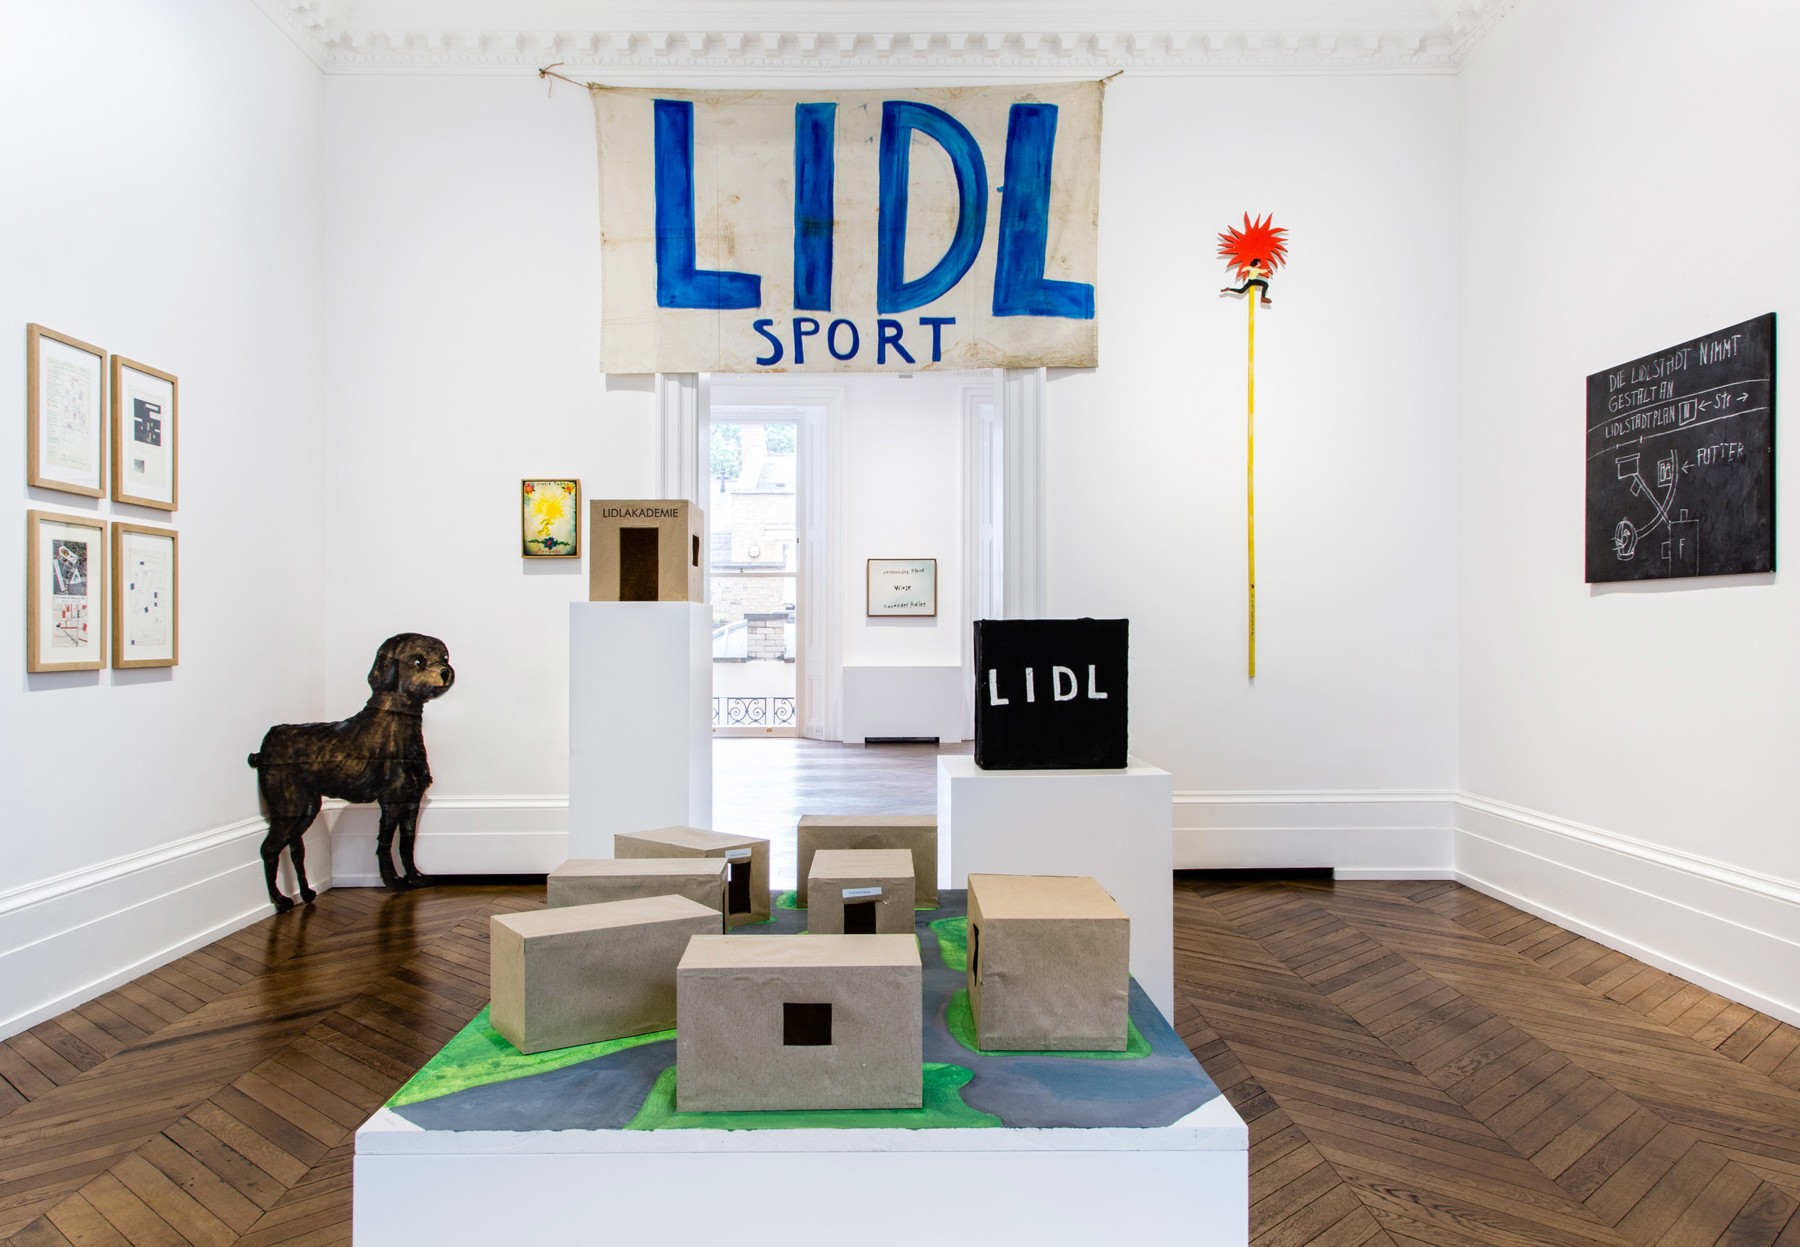 J&Ouml;RG IMMENDORFF LIDL Works and Performances from the 60s and Late Paintings after Hogarth 12 May through 2 July 2016 MAYFAIR, LONDON, Installation View 1